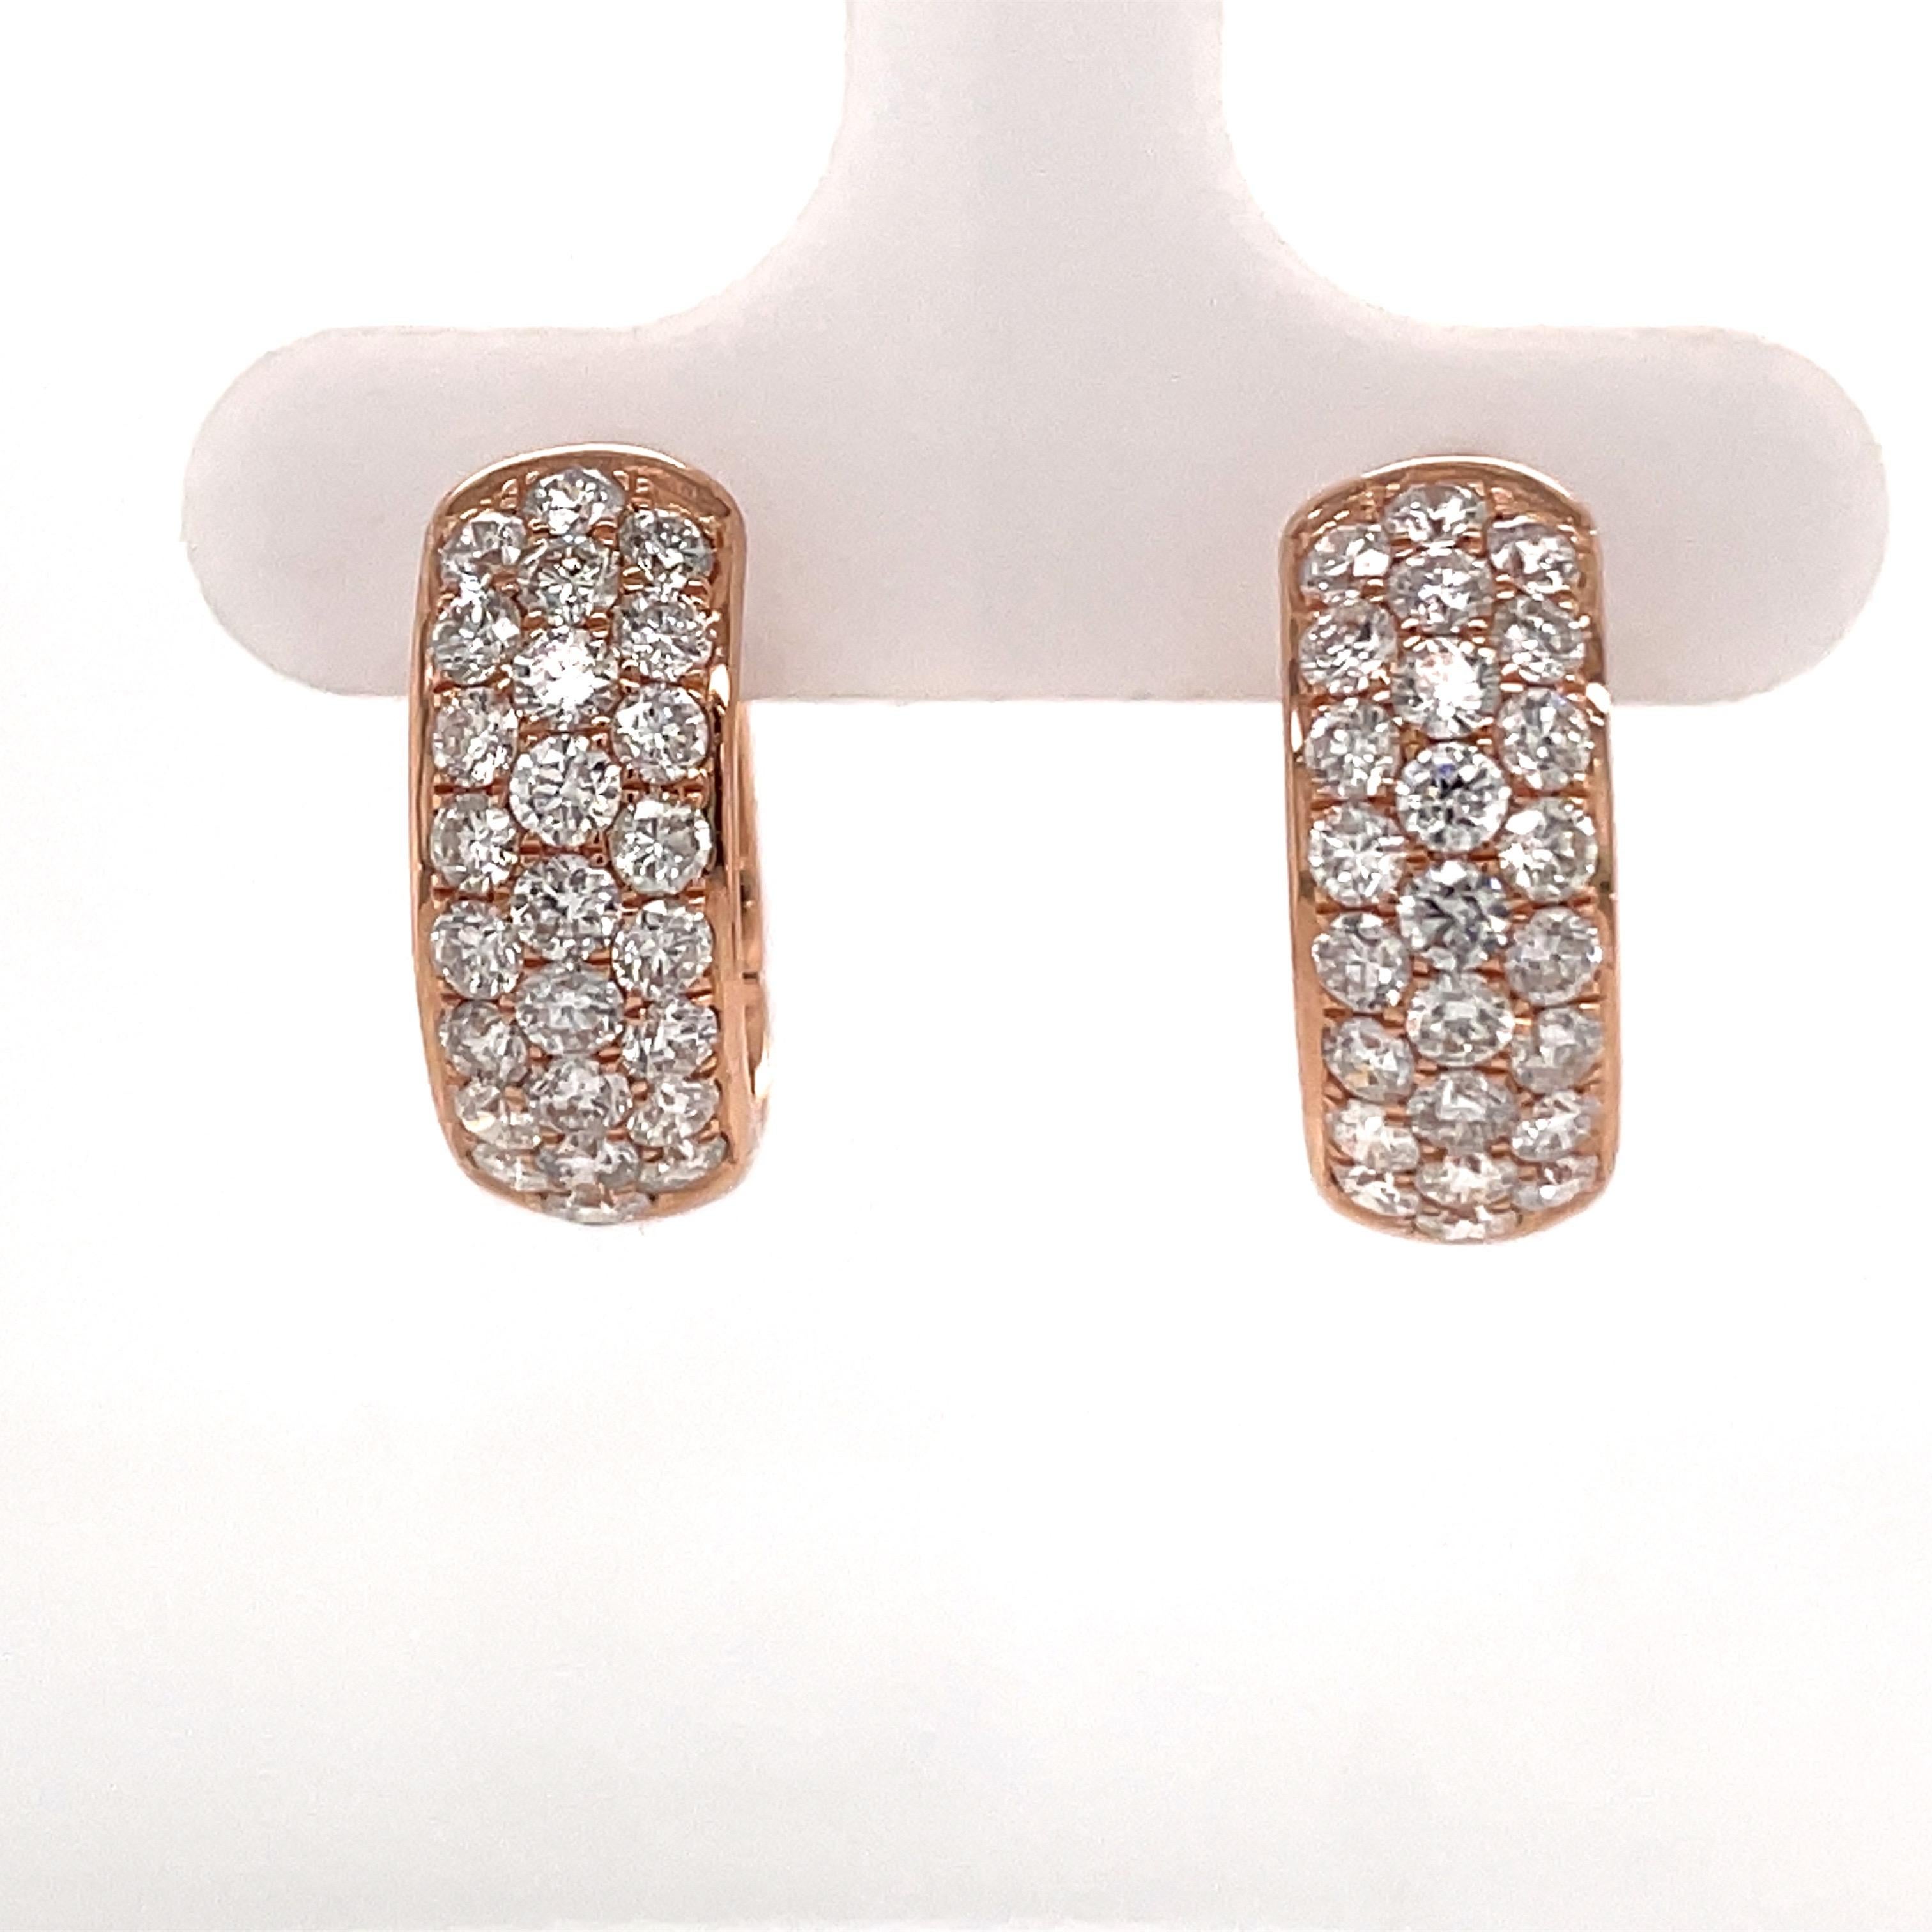 14 Karat Rose gold hoop earrings featuring three rows of round brilliants weighing 1.50 carats.
50 Diamonds
Color G-H
Clarity SI